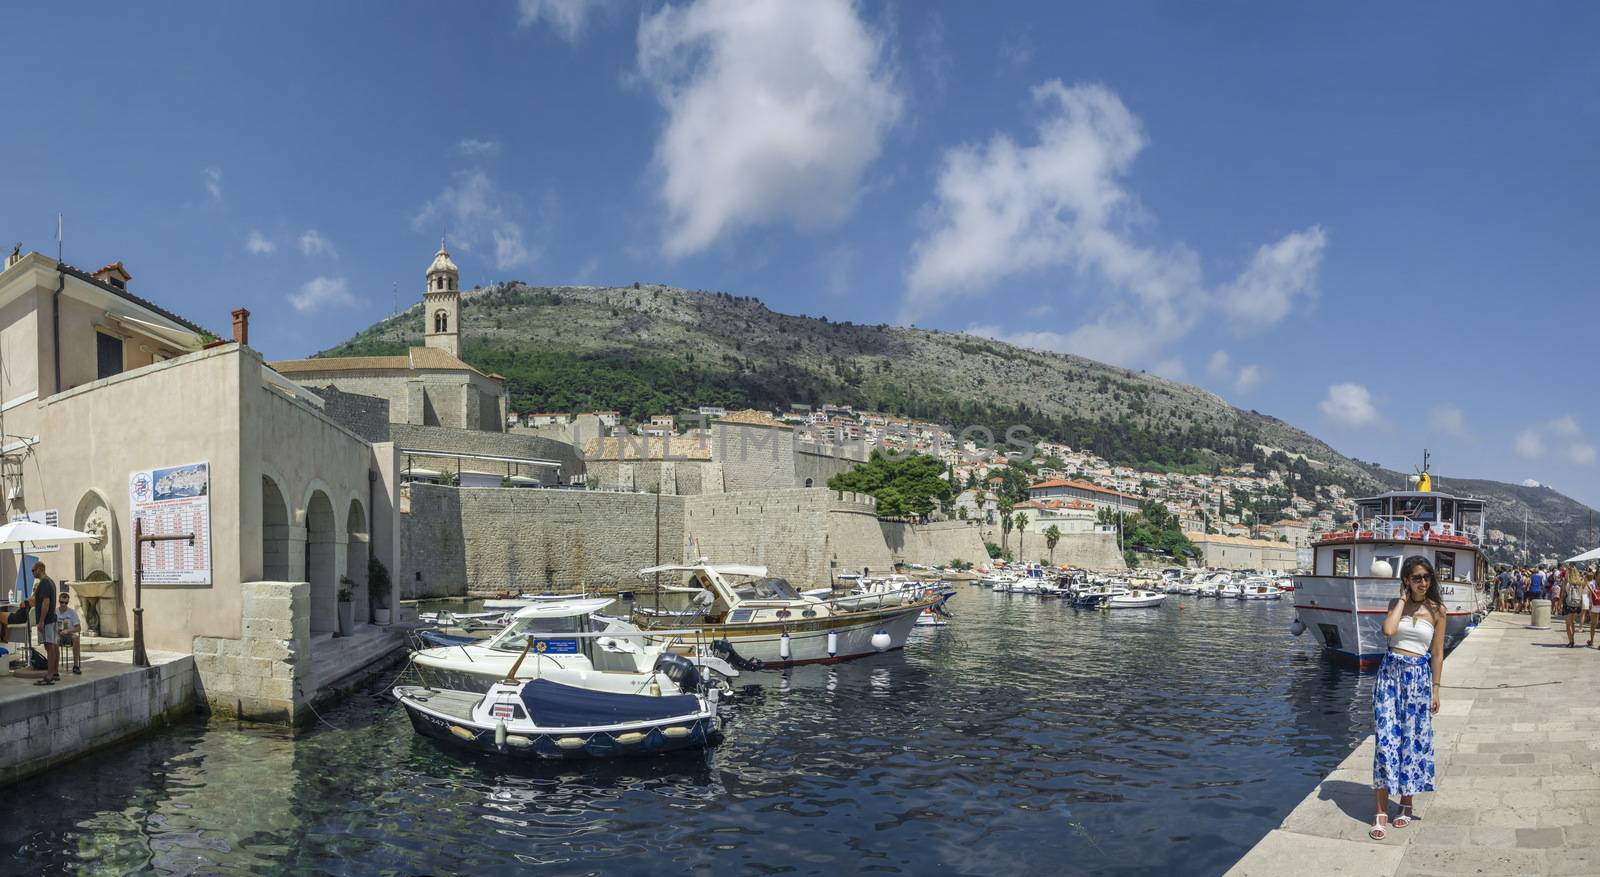 Dubrovnik, Croatia - 07. 13. 2018. Panoramic view of the Old Town and Old Port of Dubrovnik, Croatia,  in a sunny summer day